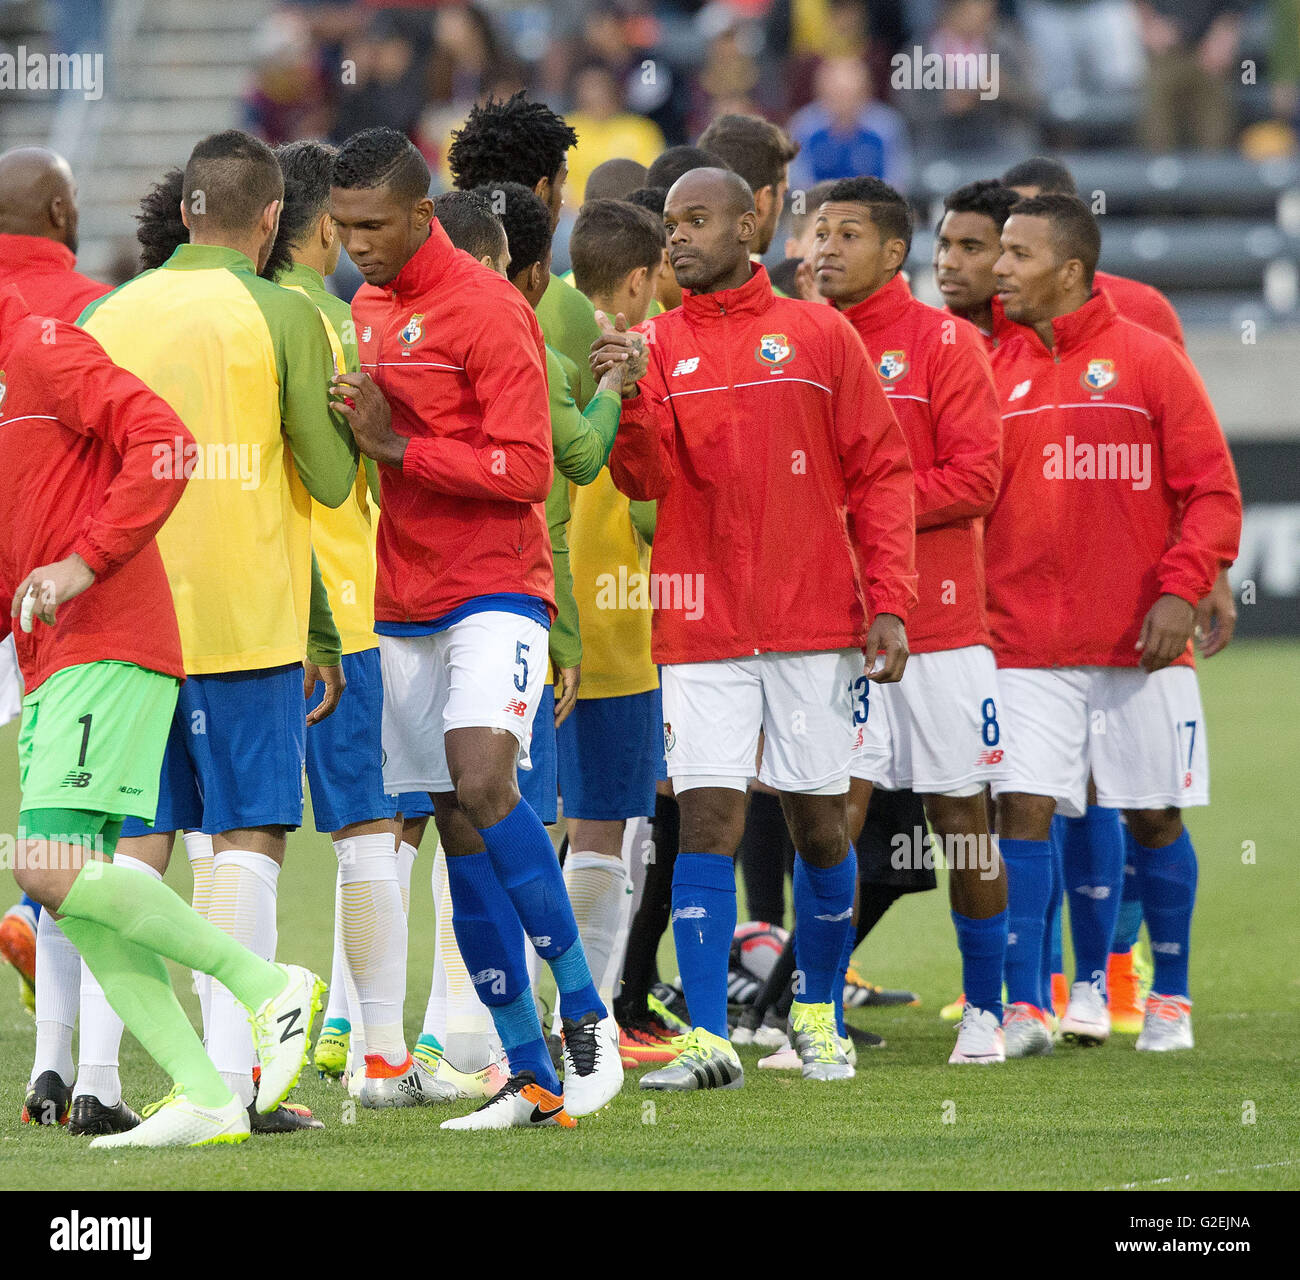 Commerce City, Colorado, USA. 29th May, 2016. Panama starters shake hands with Brazil at the start of the game during a friendly match against Panama before the Copa de Oro at Dicks Sporting Goods Park Sunday Evening. Brazil beats Panama 2-0. Credit:  Hector Acevedo/ZUMA Wire/Alamy Live News Stock Photo